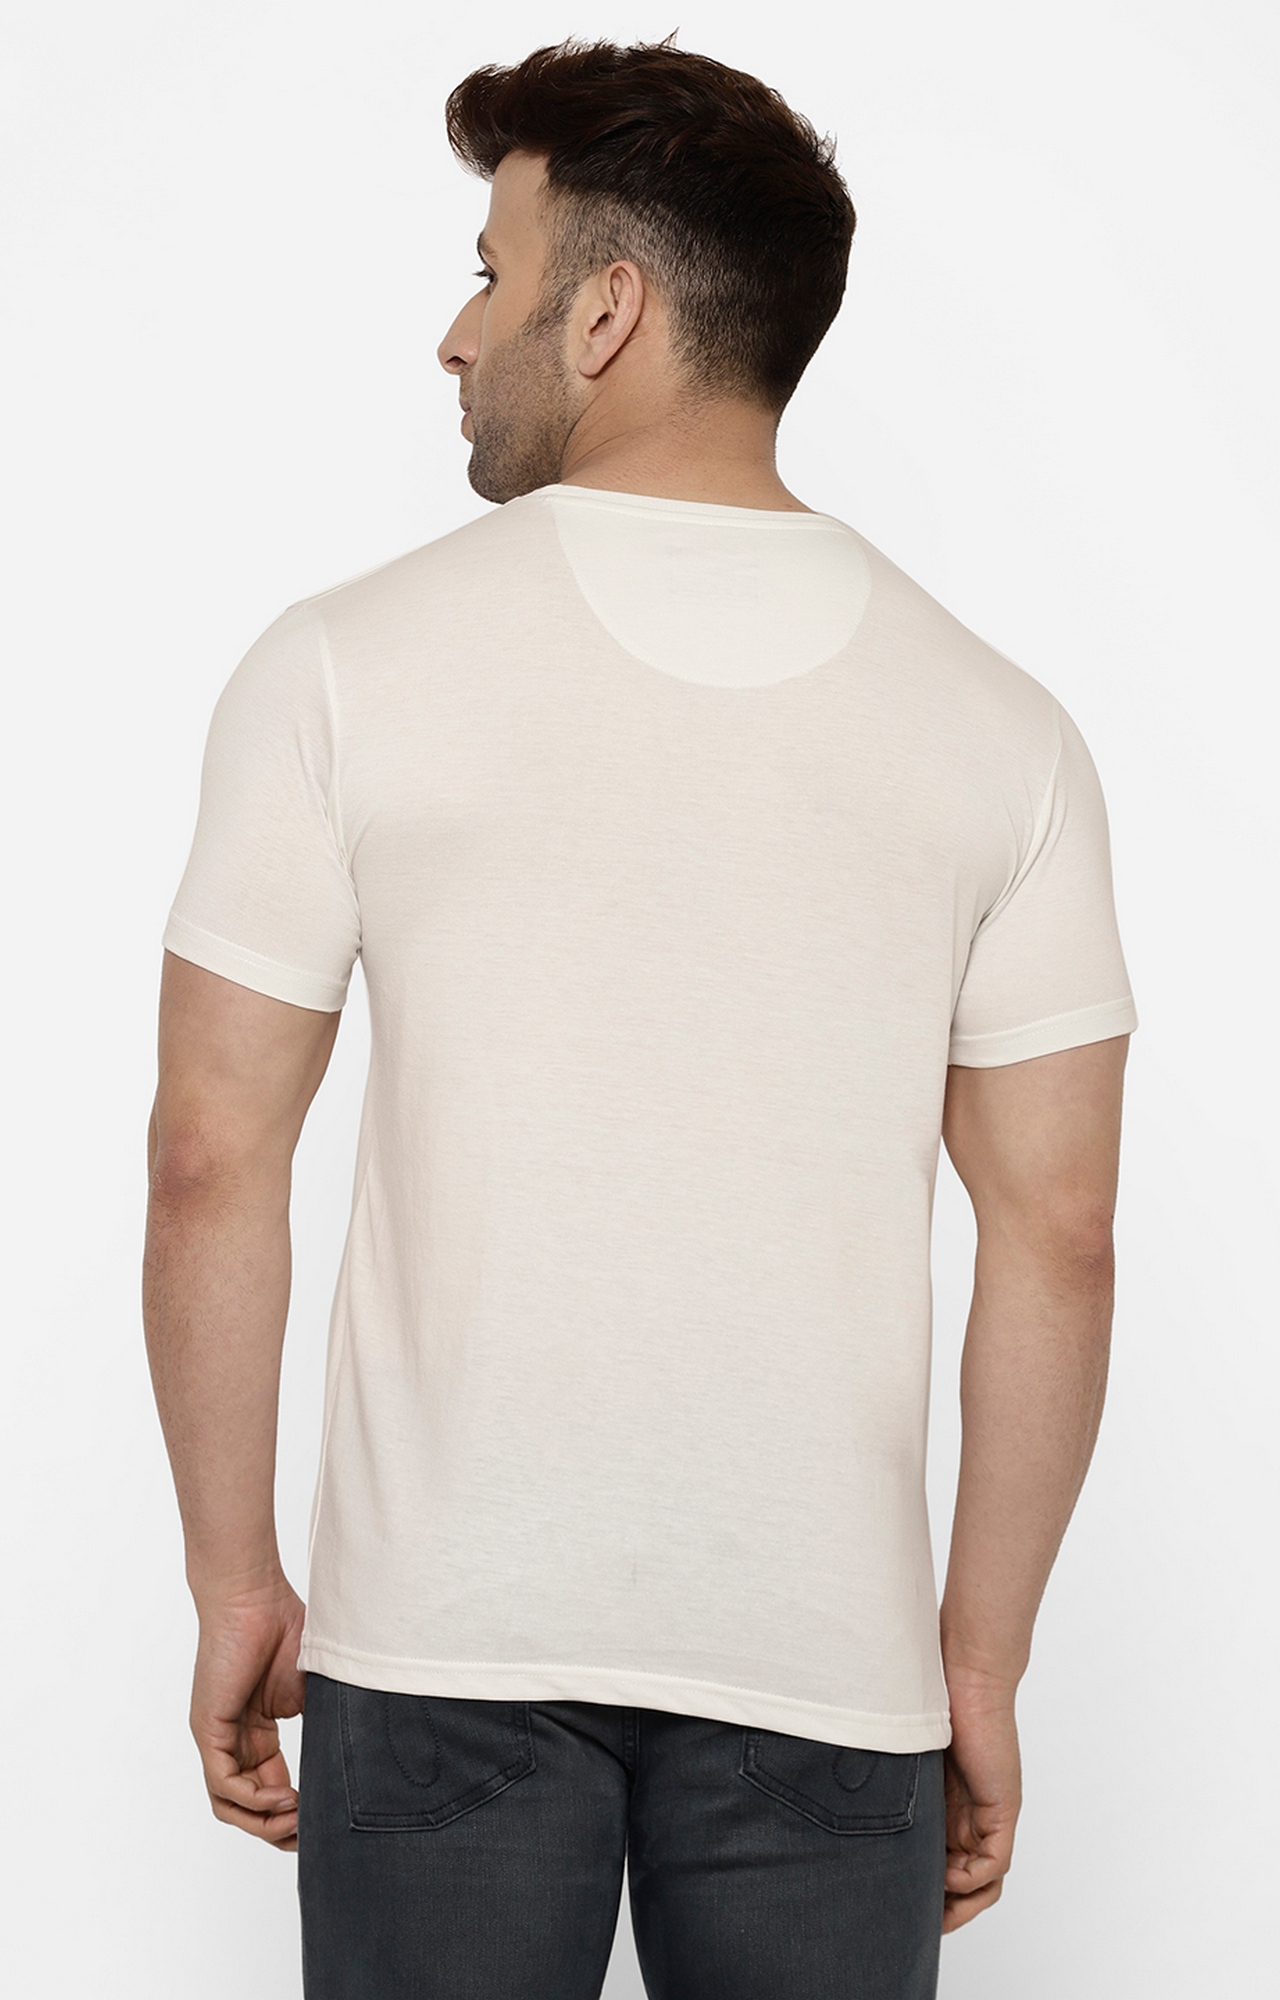 Cape Canary | Cape Canary Men's Off-White Cotton Printed T-shirt 4